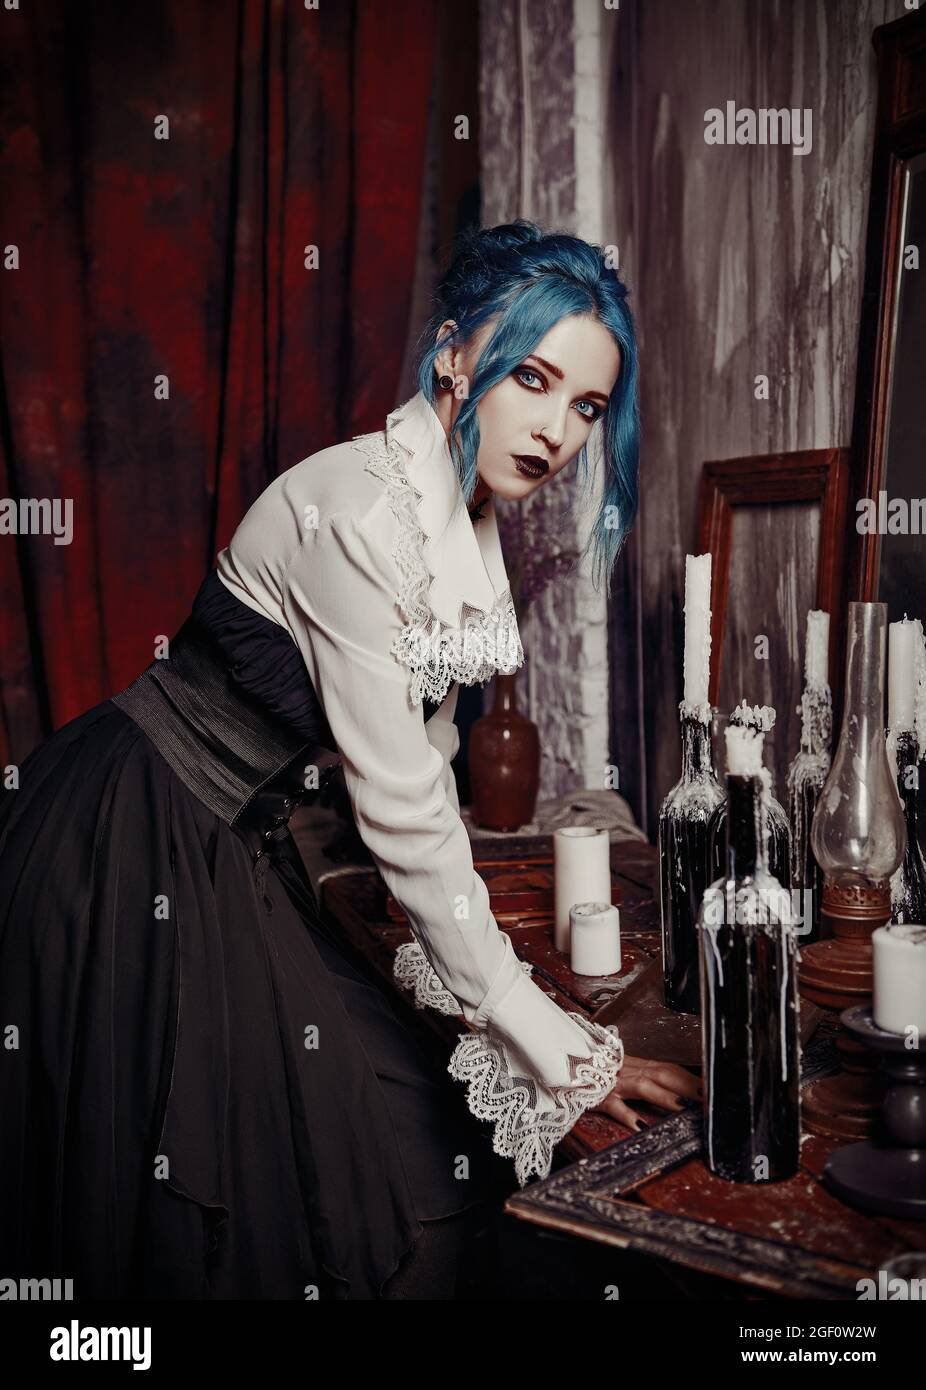 Indoors portrait of gorgeous goth girl in black skirt and white shirt.  Blue-haired gothic lady. Vintage look Stock Photo - Alamy